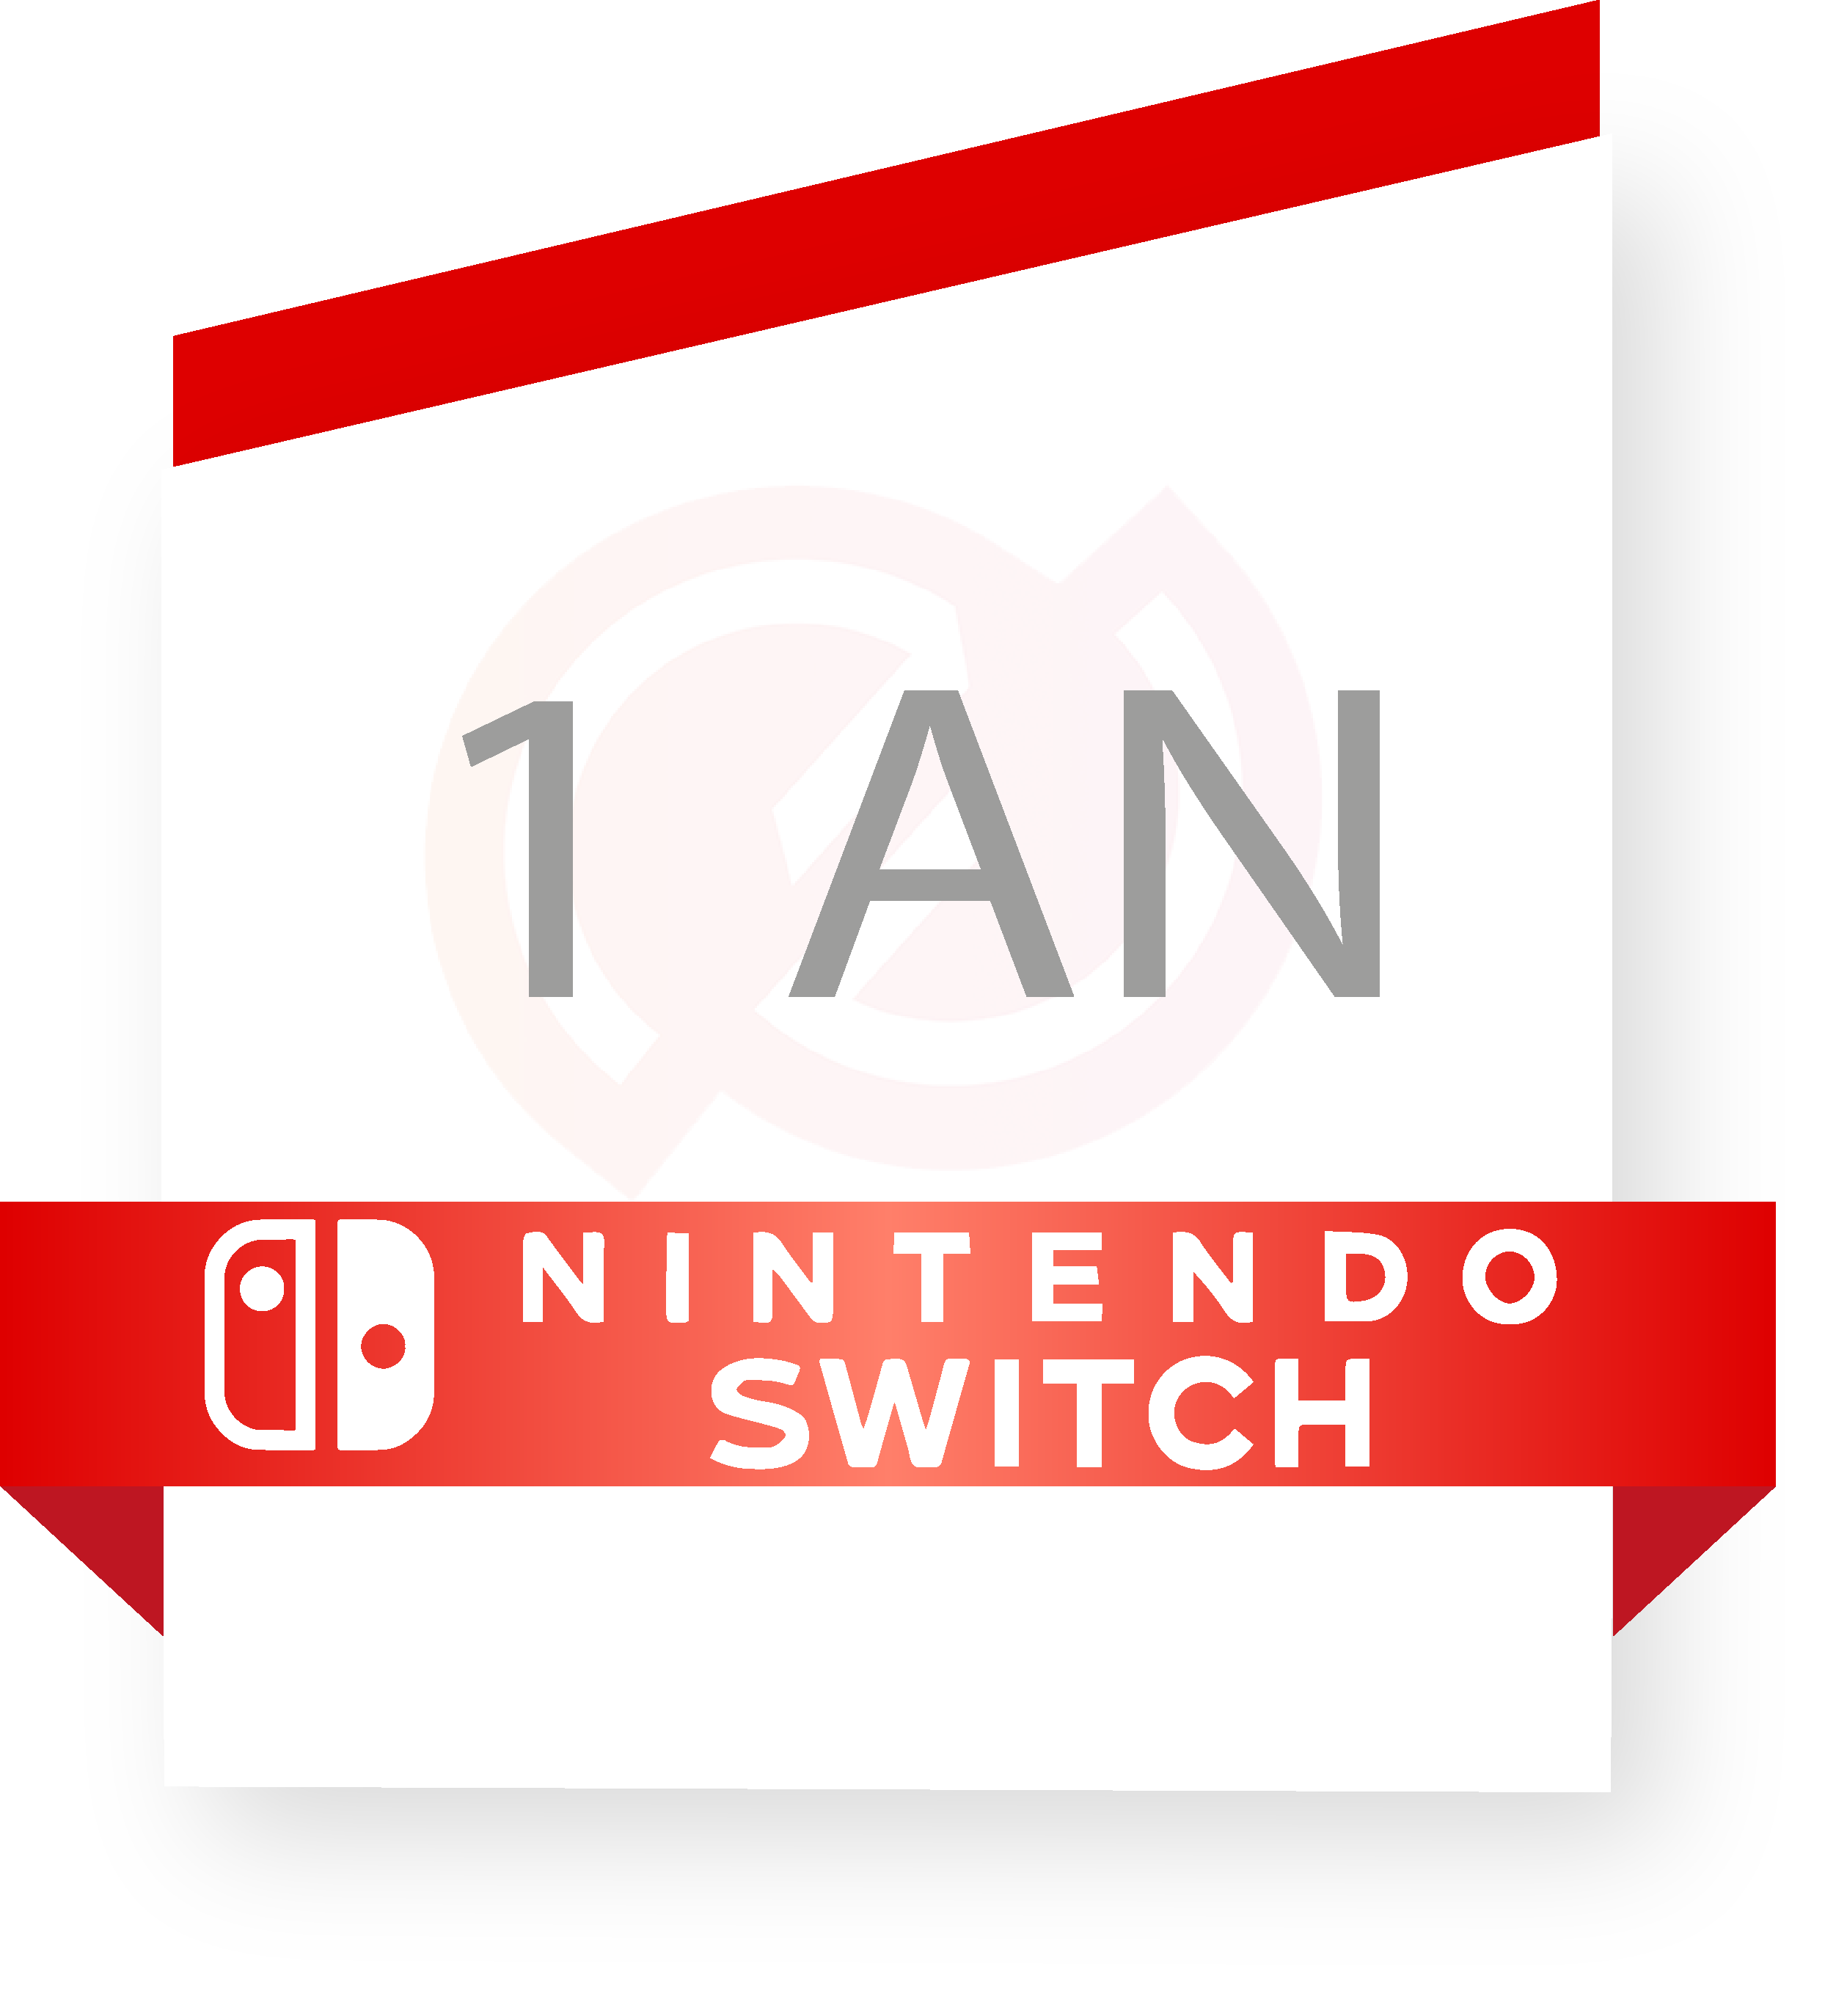 Coupon nintendo-switch-online-1an